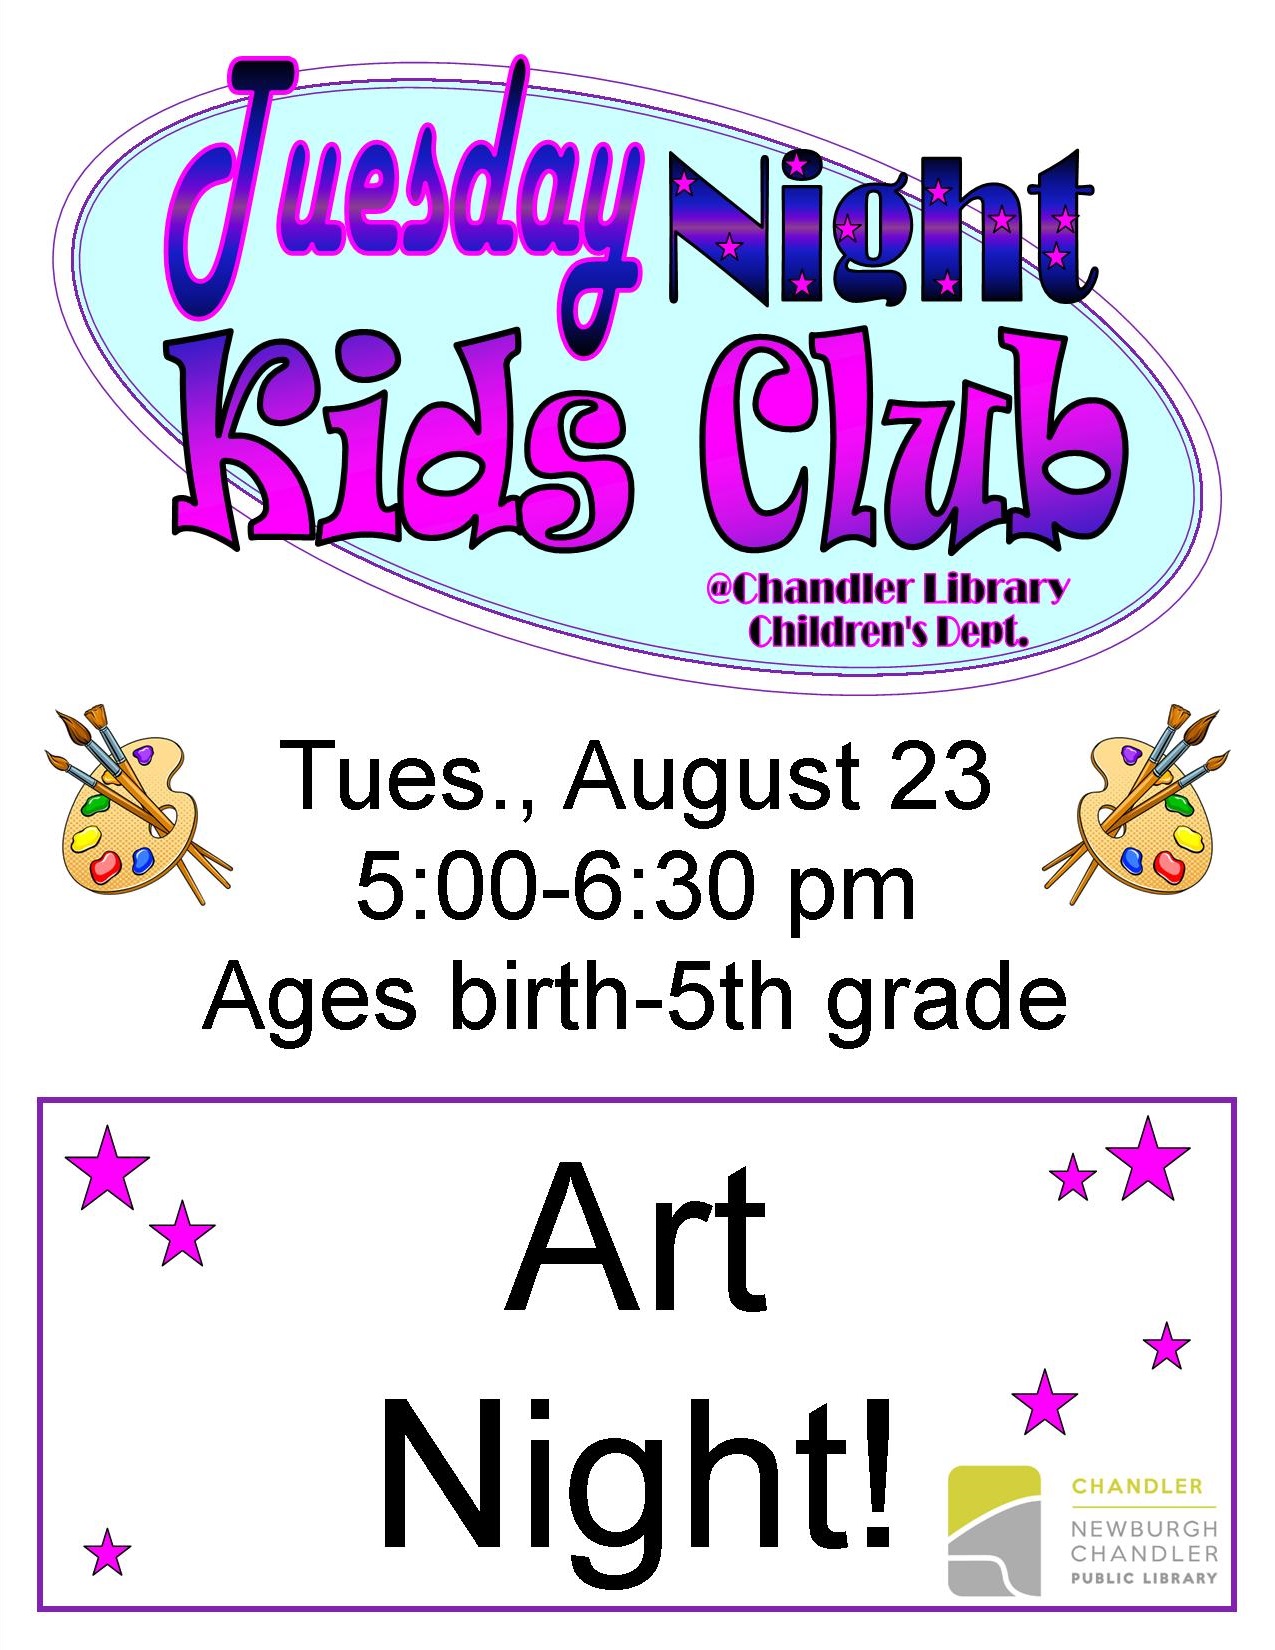 Tuesday Night Kids Club: Art Night @ Chandler Library Children's Department | Chandler | Indiana | United States